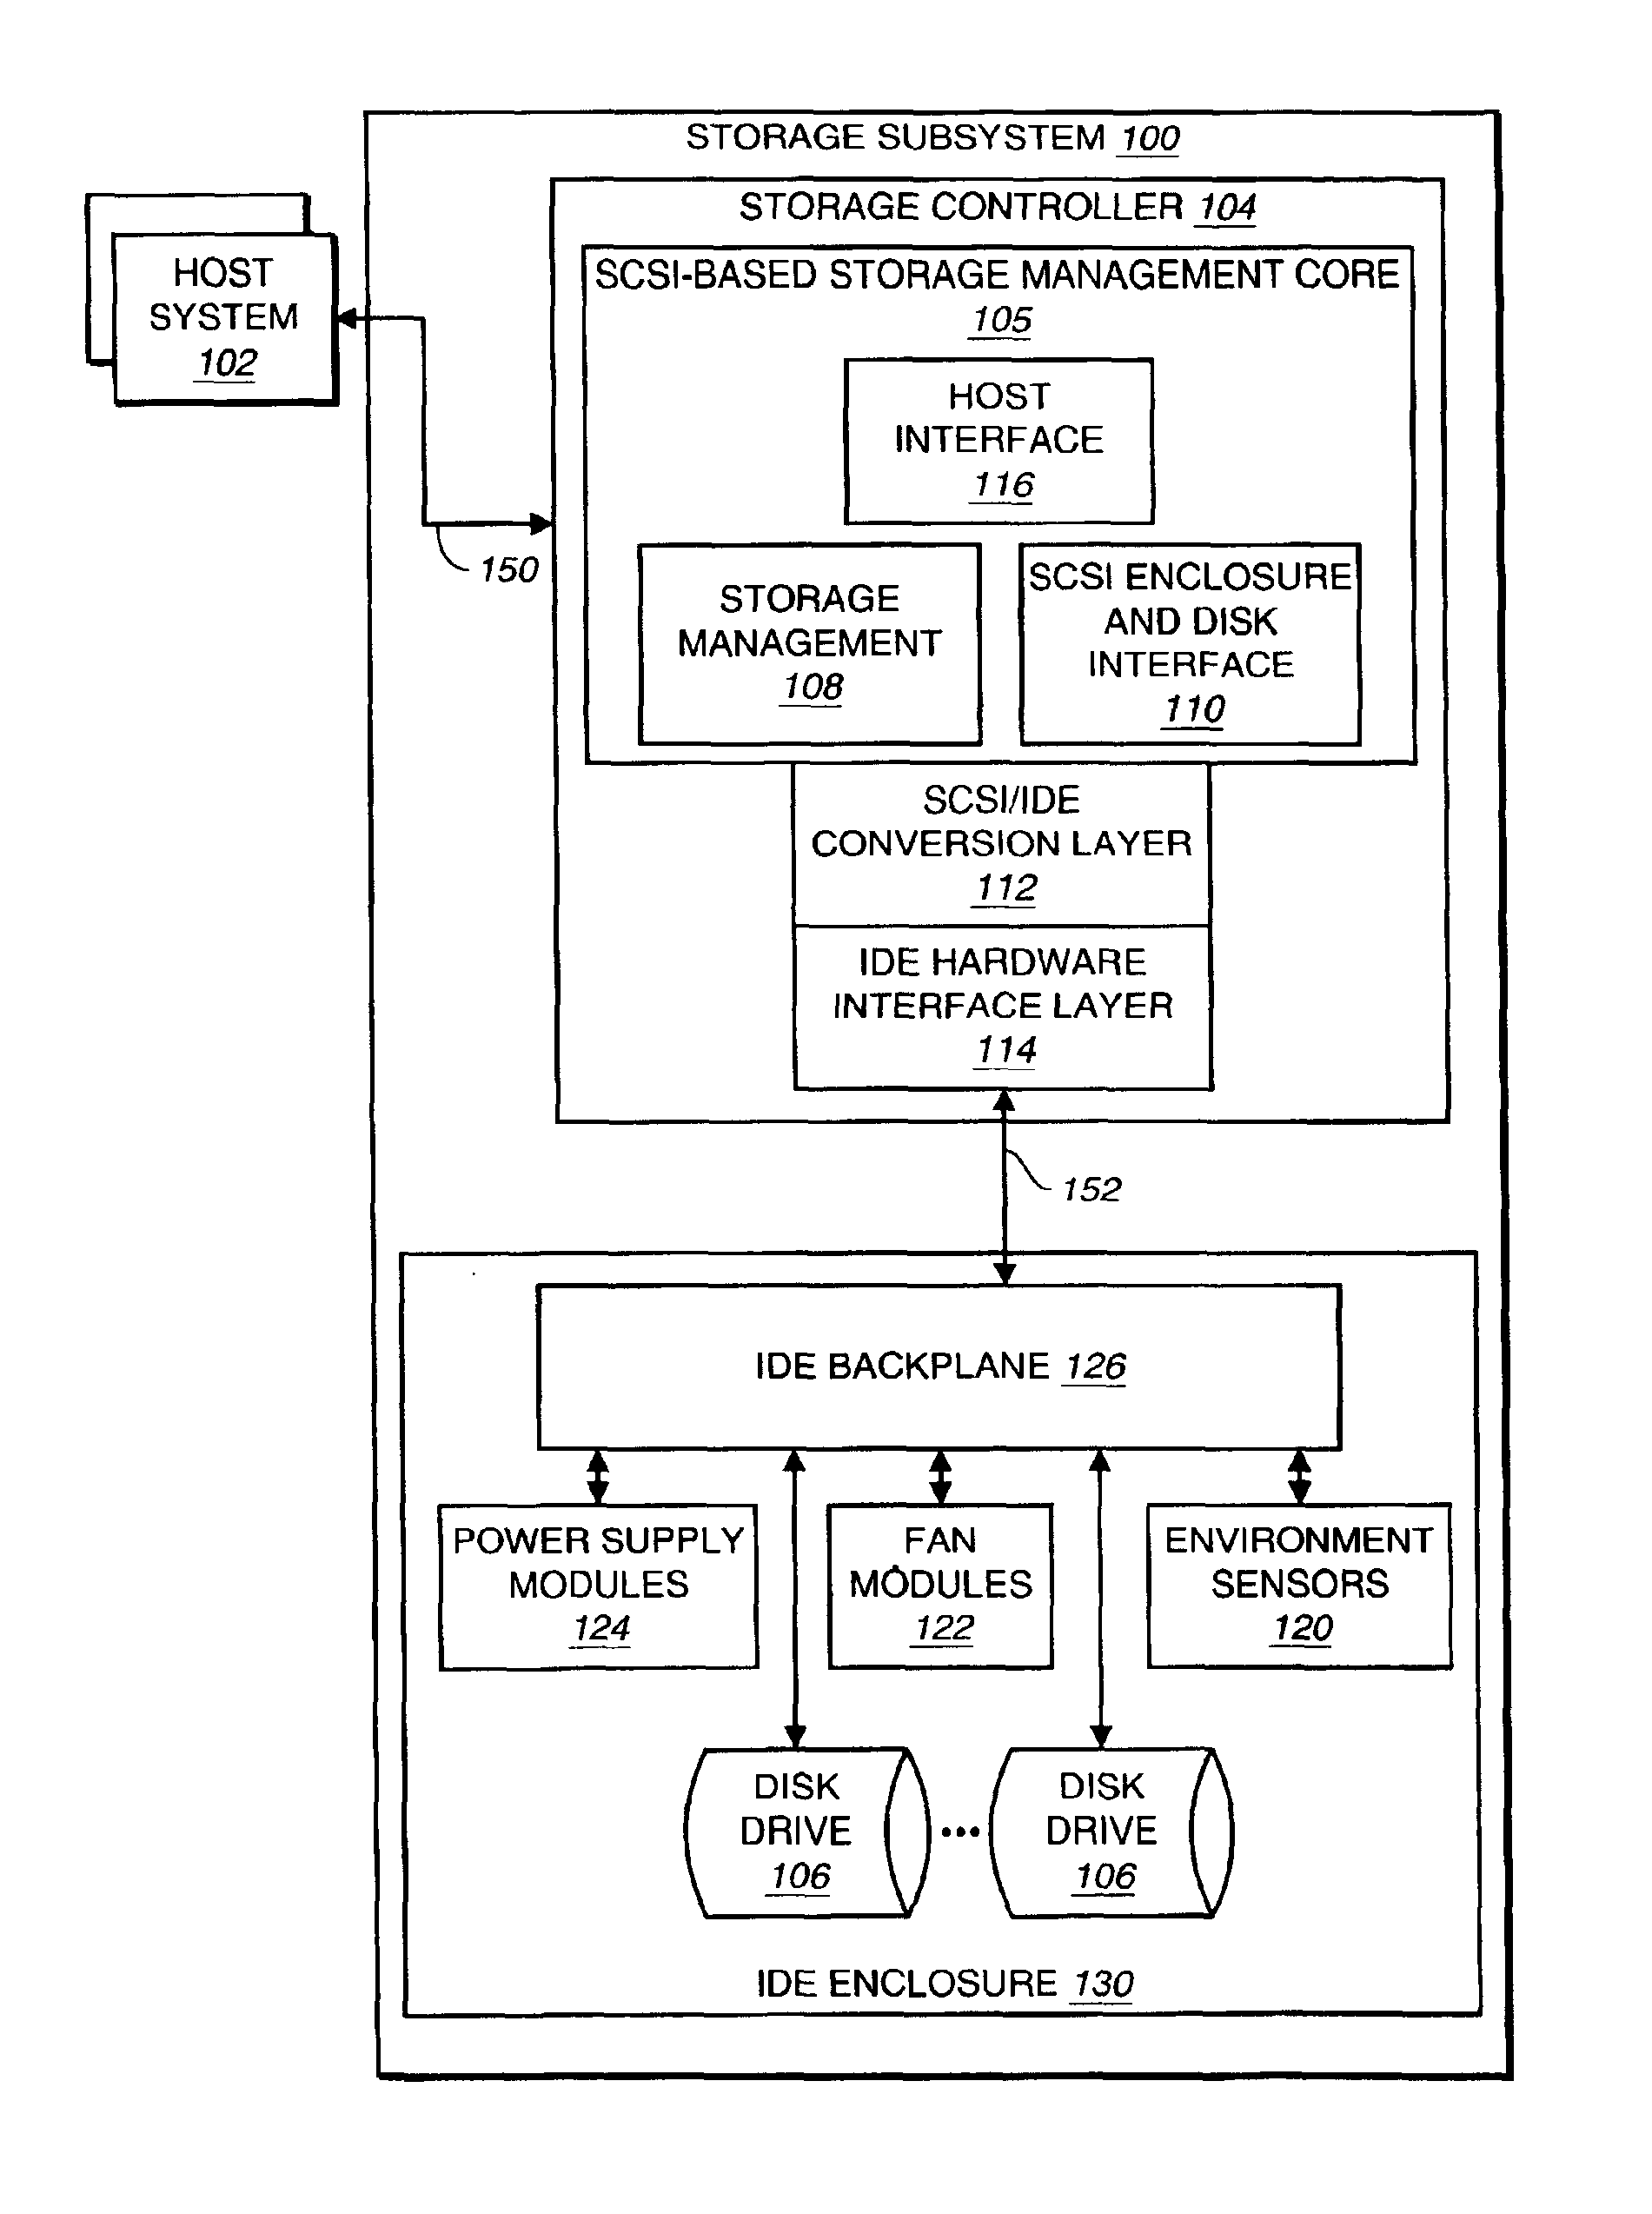 Methods and structure for SCSI/IDE translation for non-SCSI enclosures in a storage subsystem